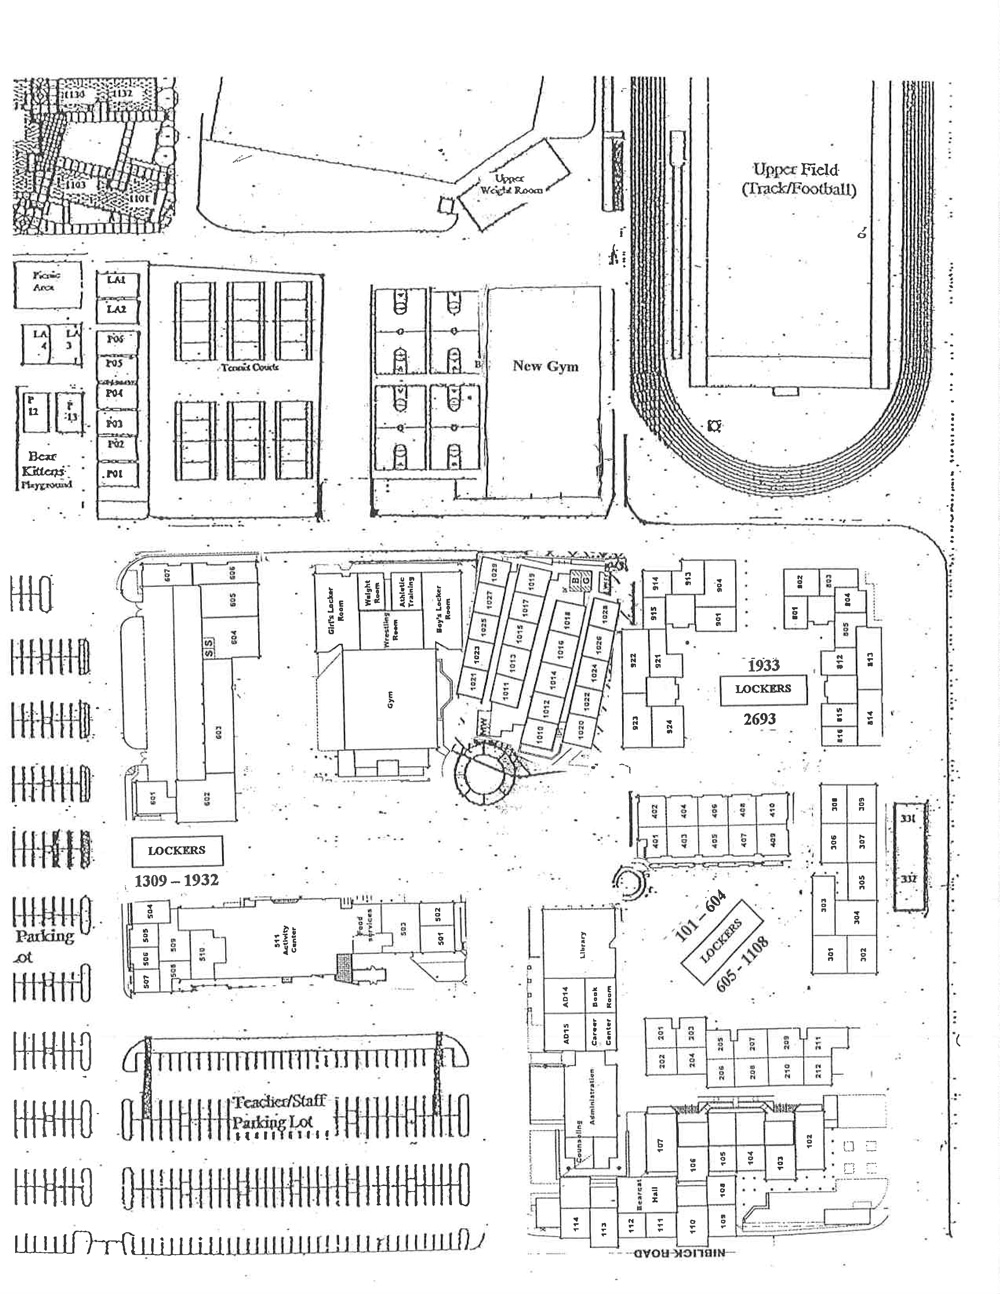 Paso Robles High School map of campus